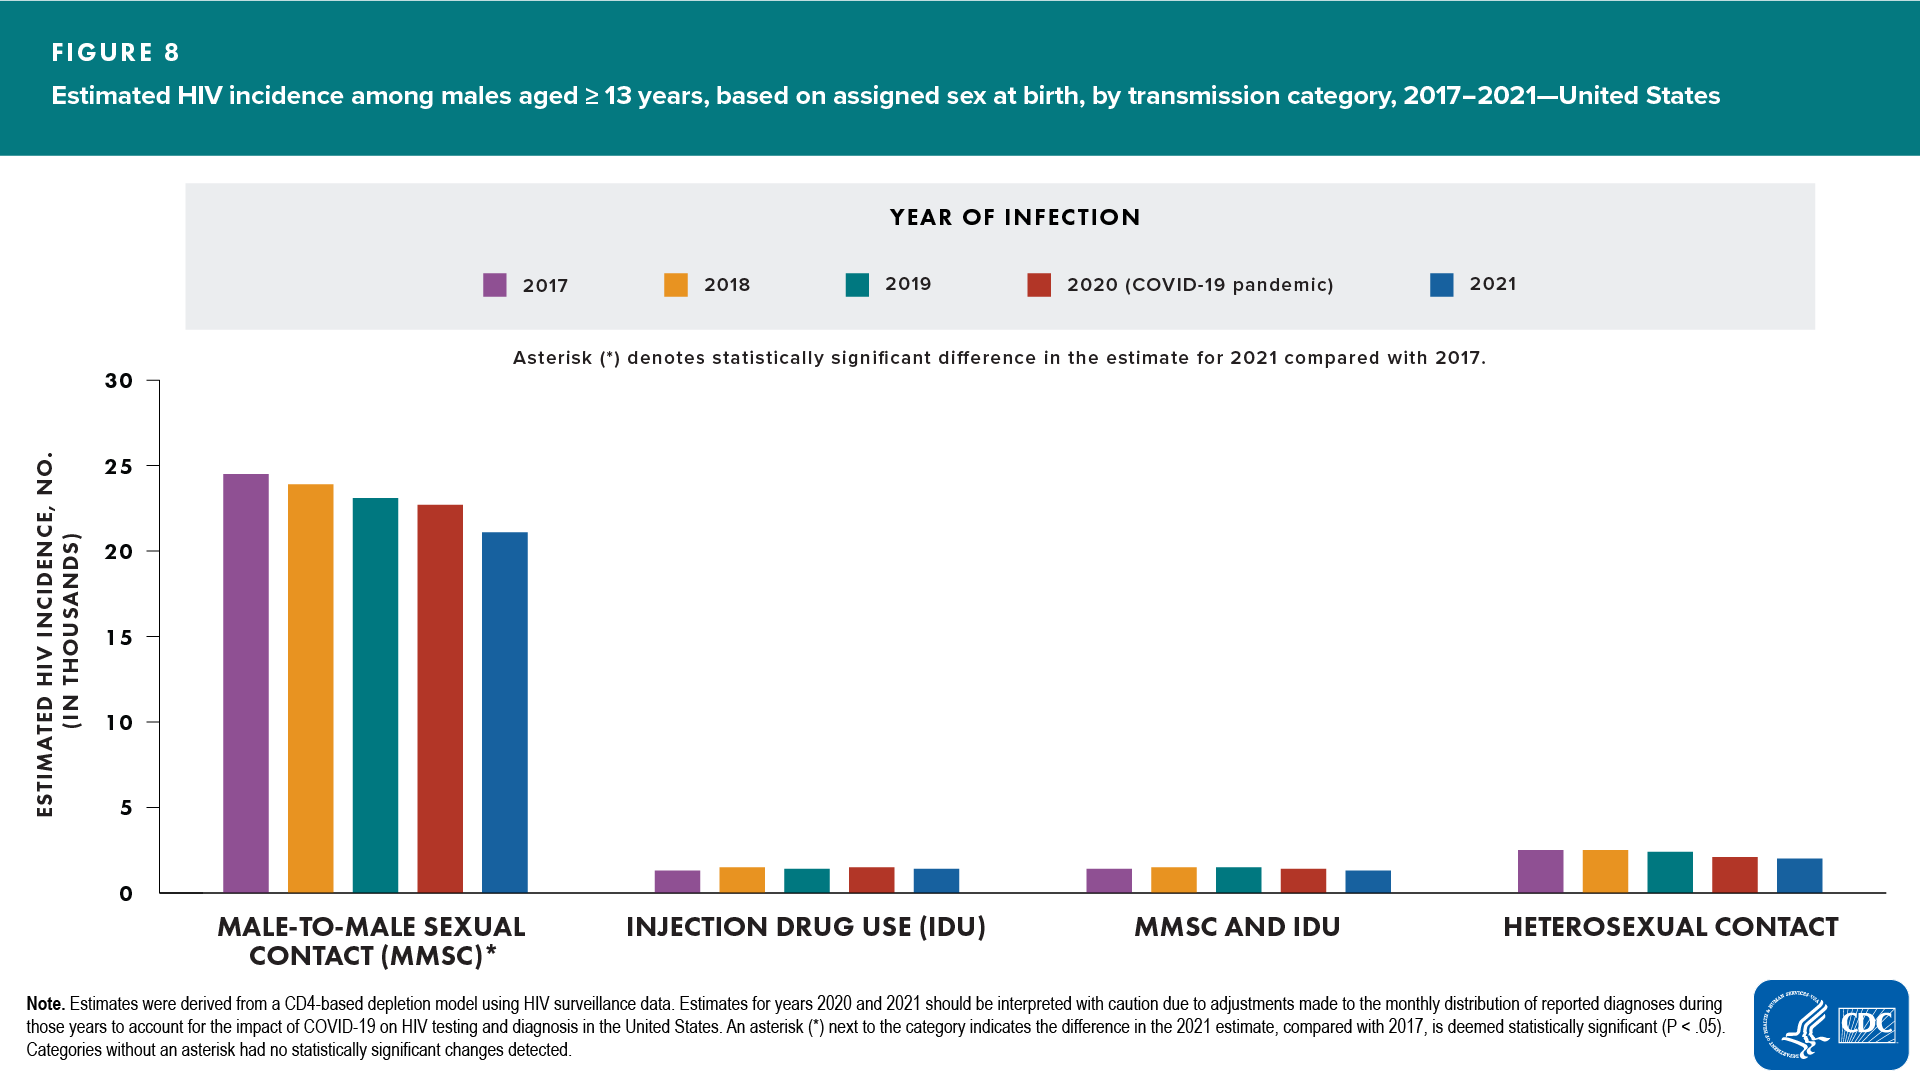 Figure 8. Estimated HIV incidence among males aged ≥13 years, based on assigned sex at birth, by transmission category, 2017–2021—United States